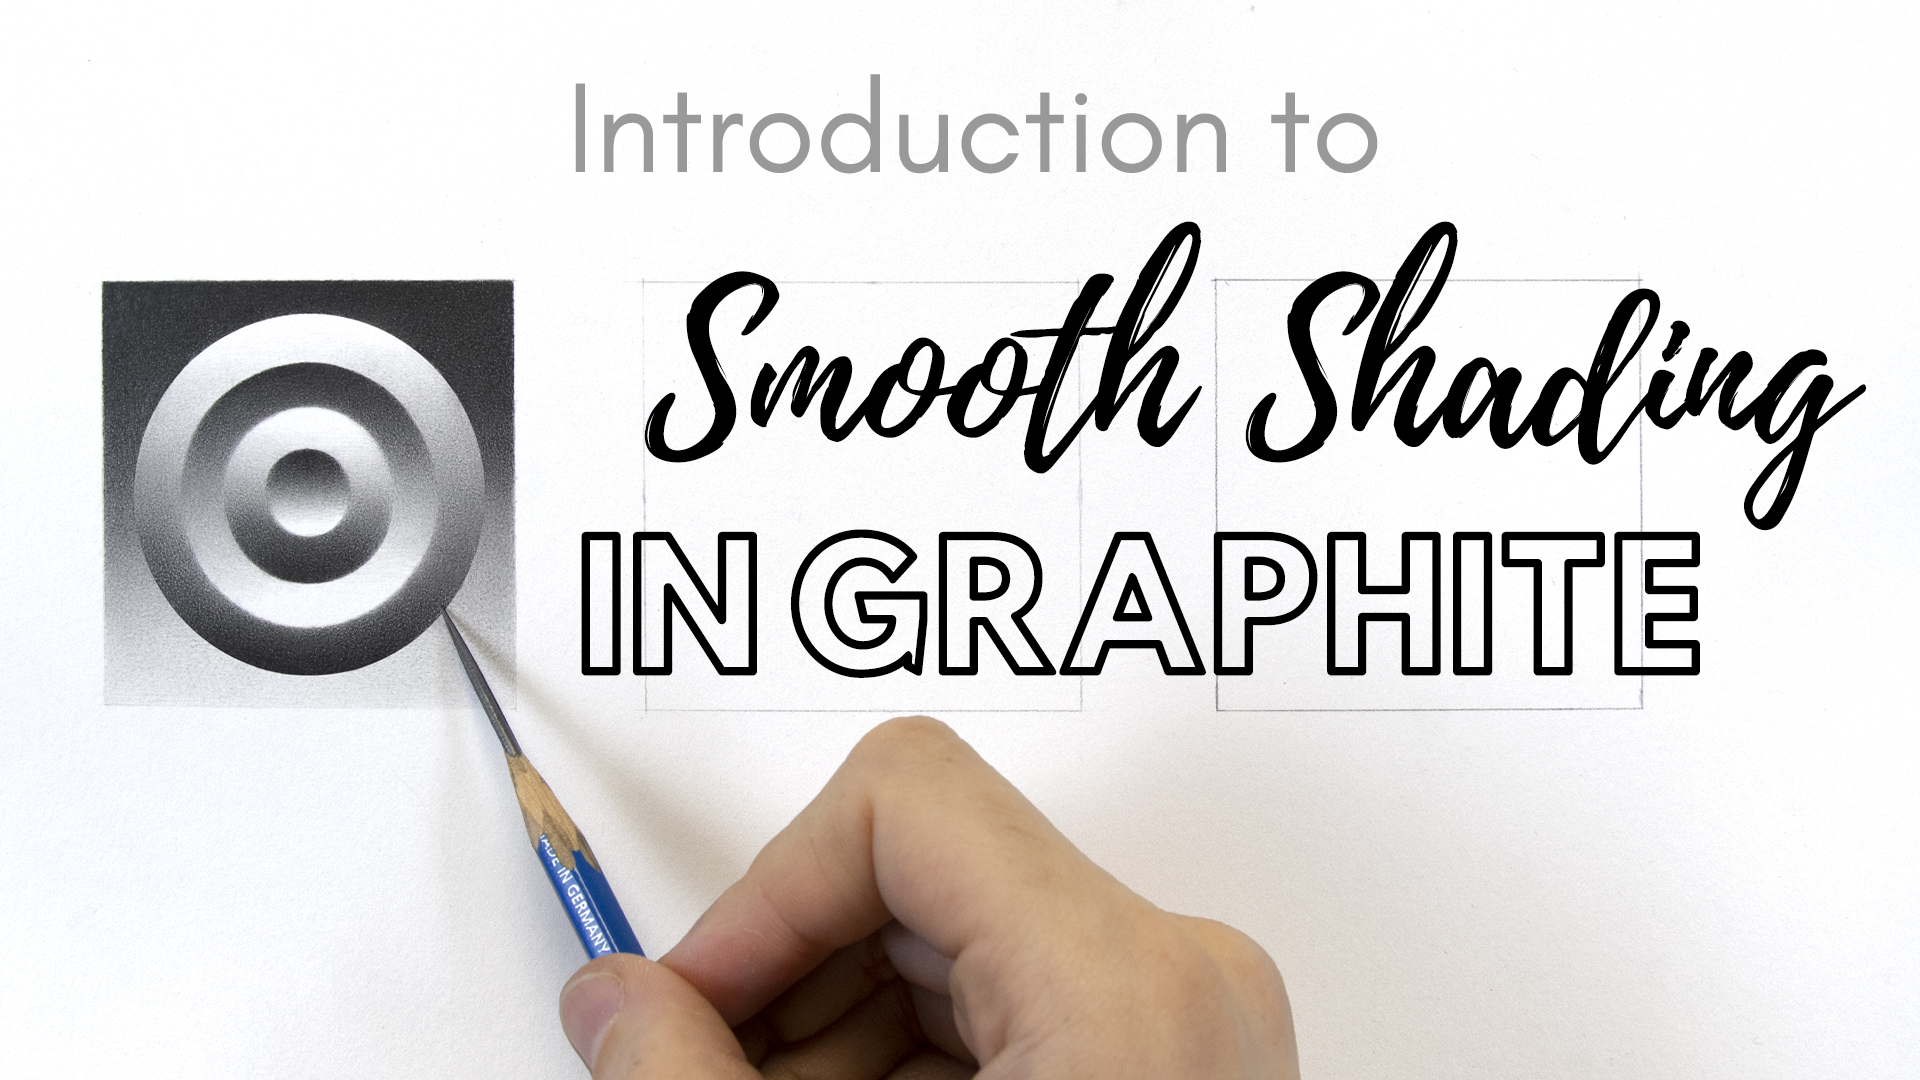 Introduction to Smooth Shading in Graphite